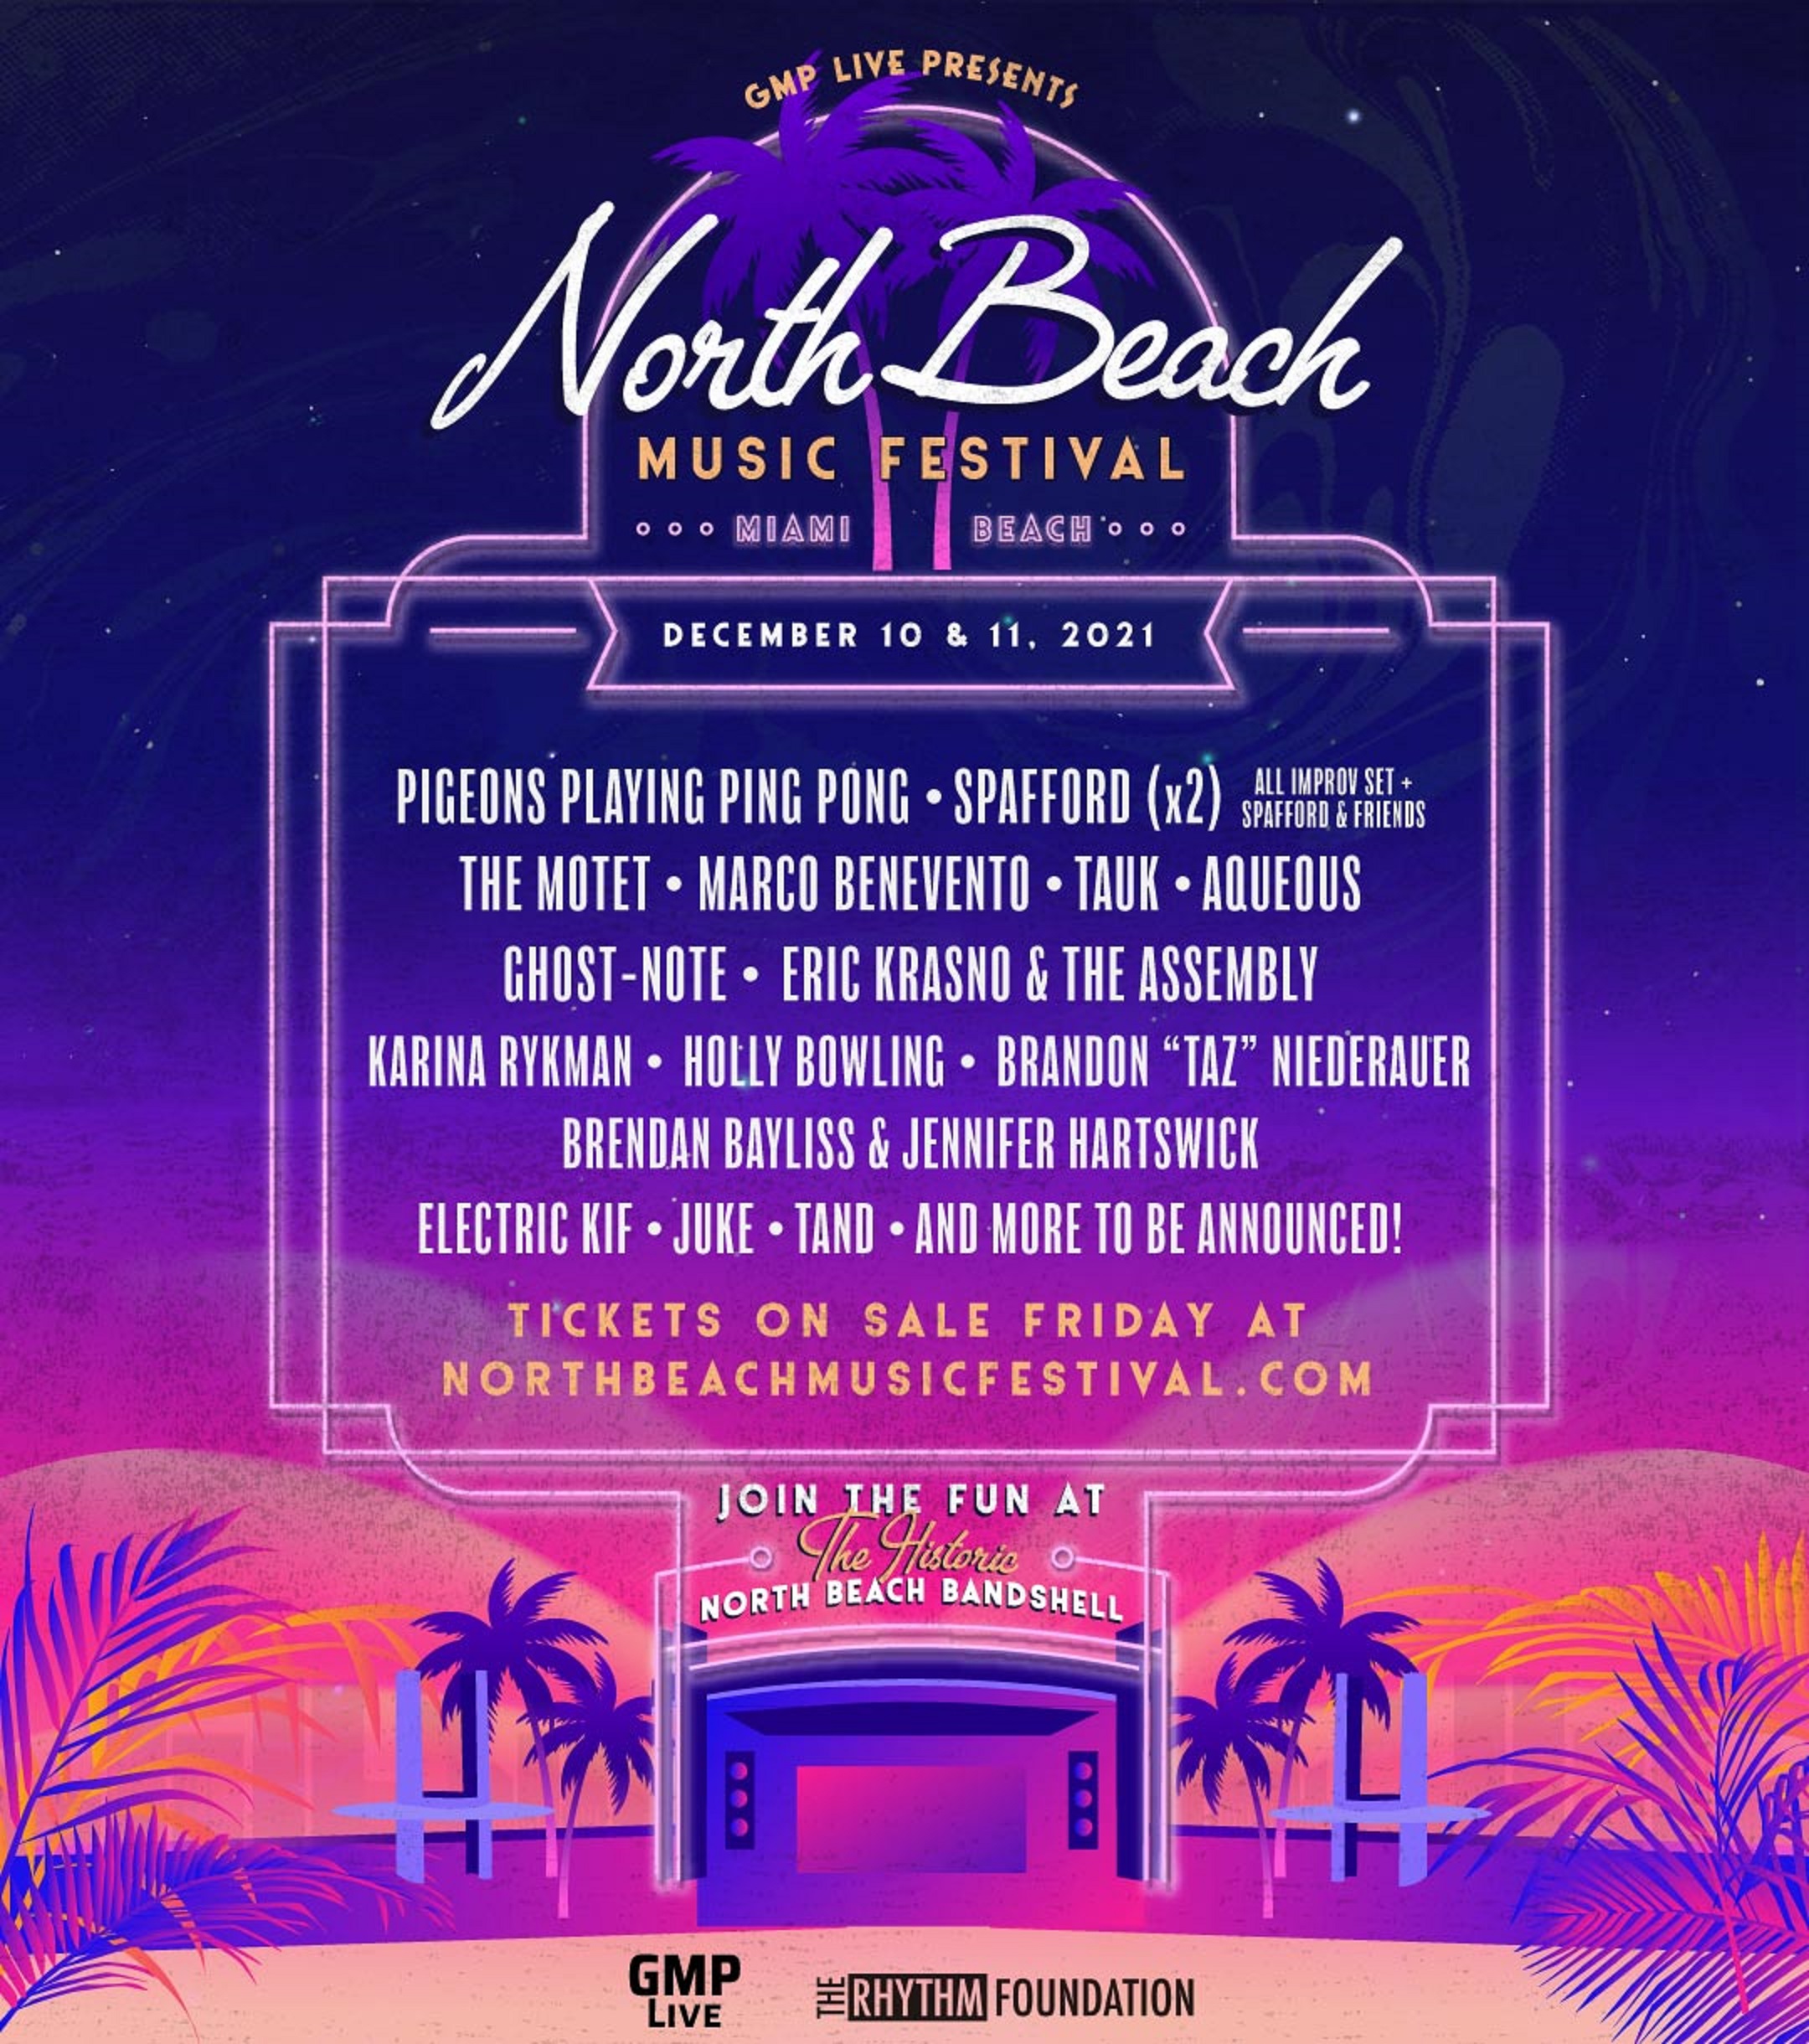 North Beach Music Festival is Coming Up!